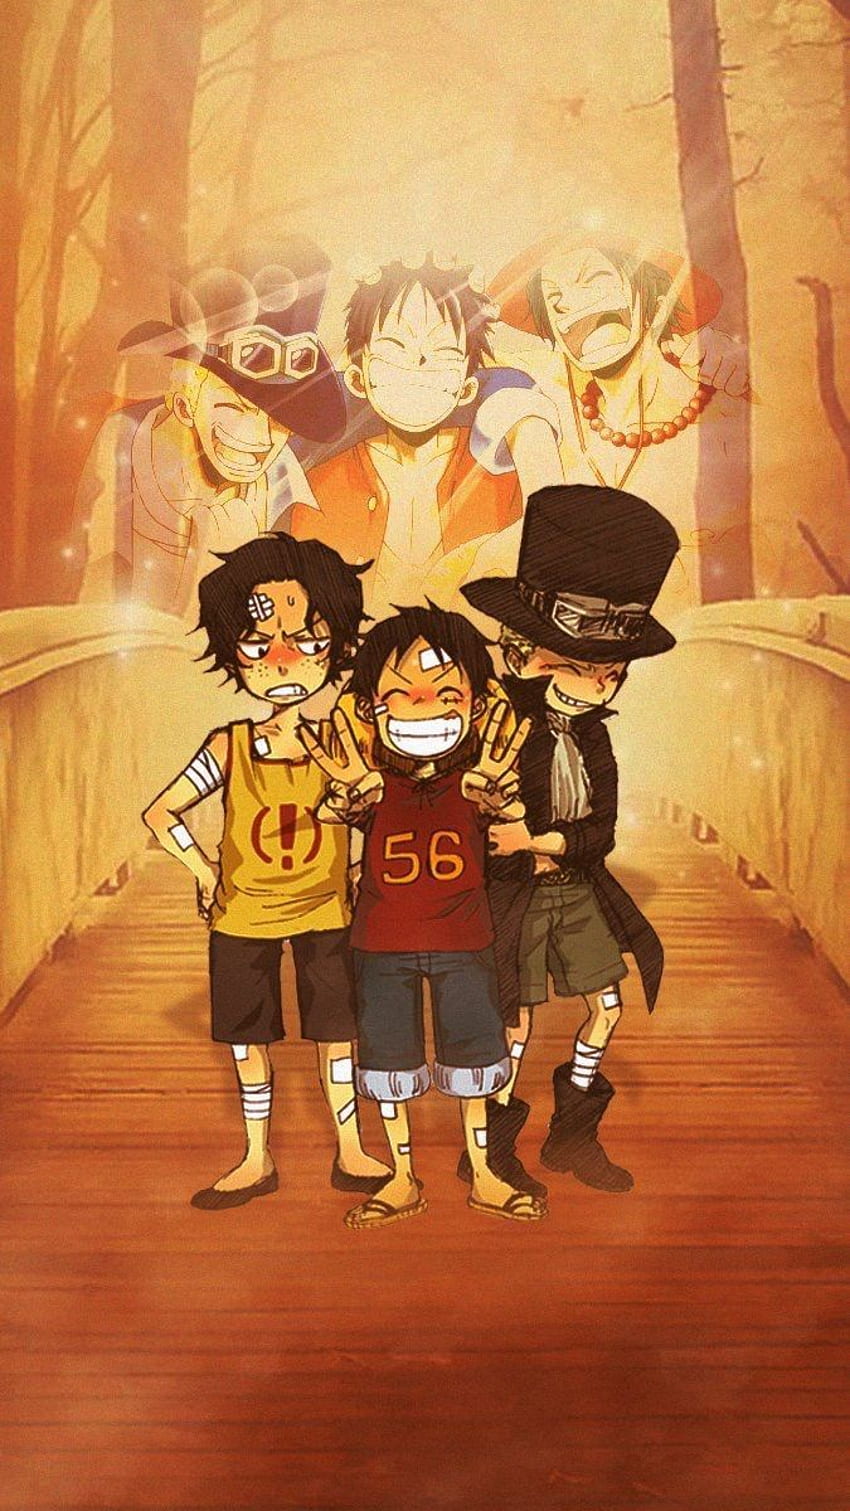 Wallpaper ID 459498  Anime One Piece Phone Wallpaper Portgas D Ace  Monkey D Luffy 720x1280 free download